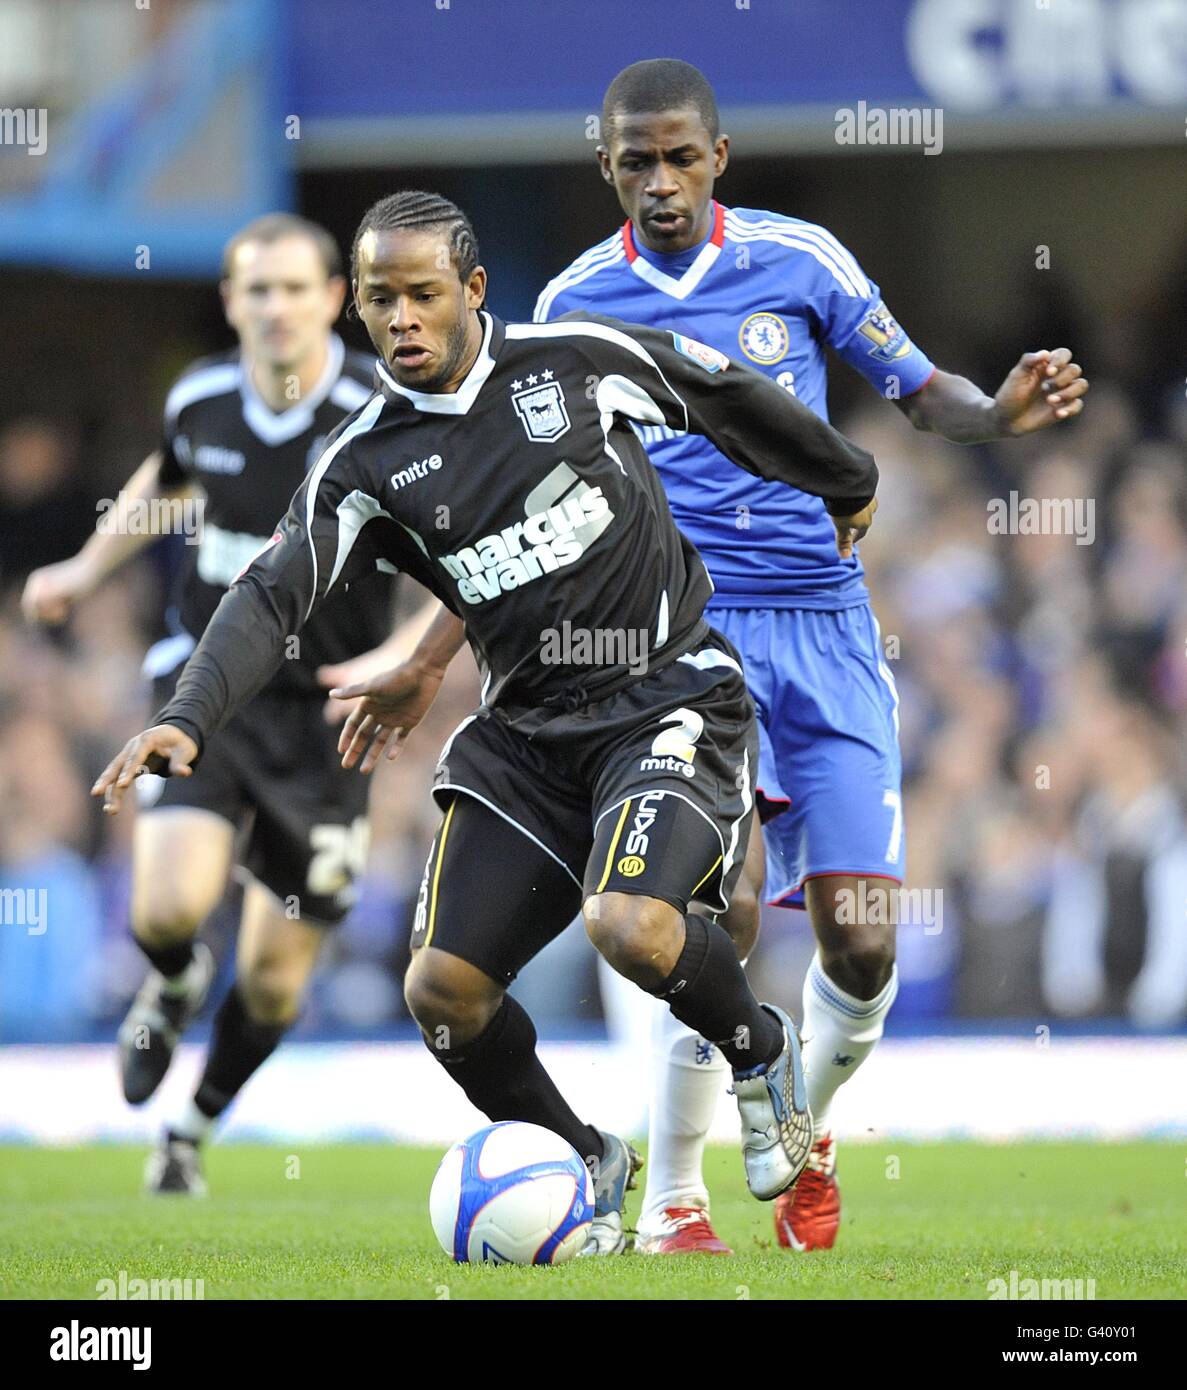 Soccer - FA Cup - Third Round - Chelsea v Ipswich Town - Stamford Bridge. Ipswich Town's Jaime Peters (left) and Chelsea's Ramires (right) Stock Photo